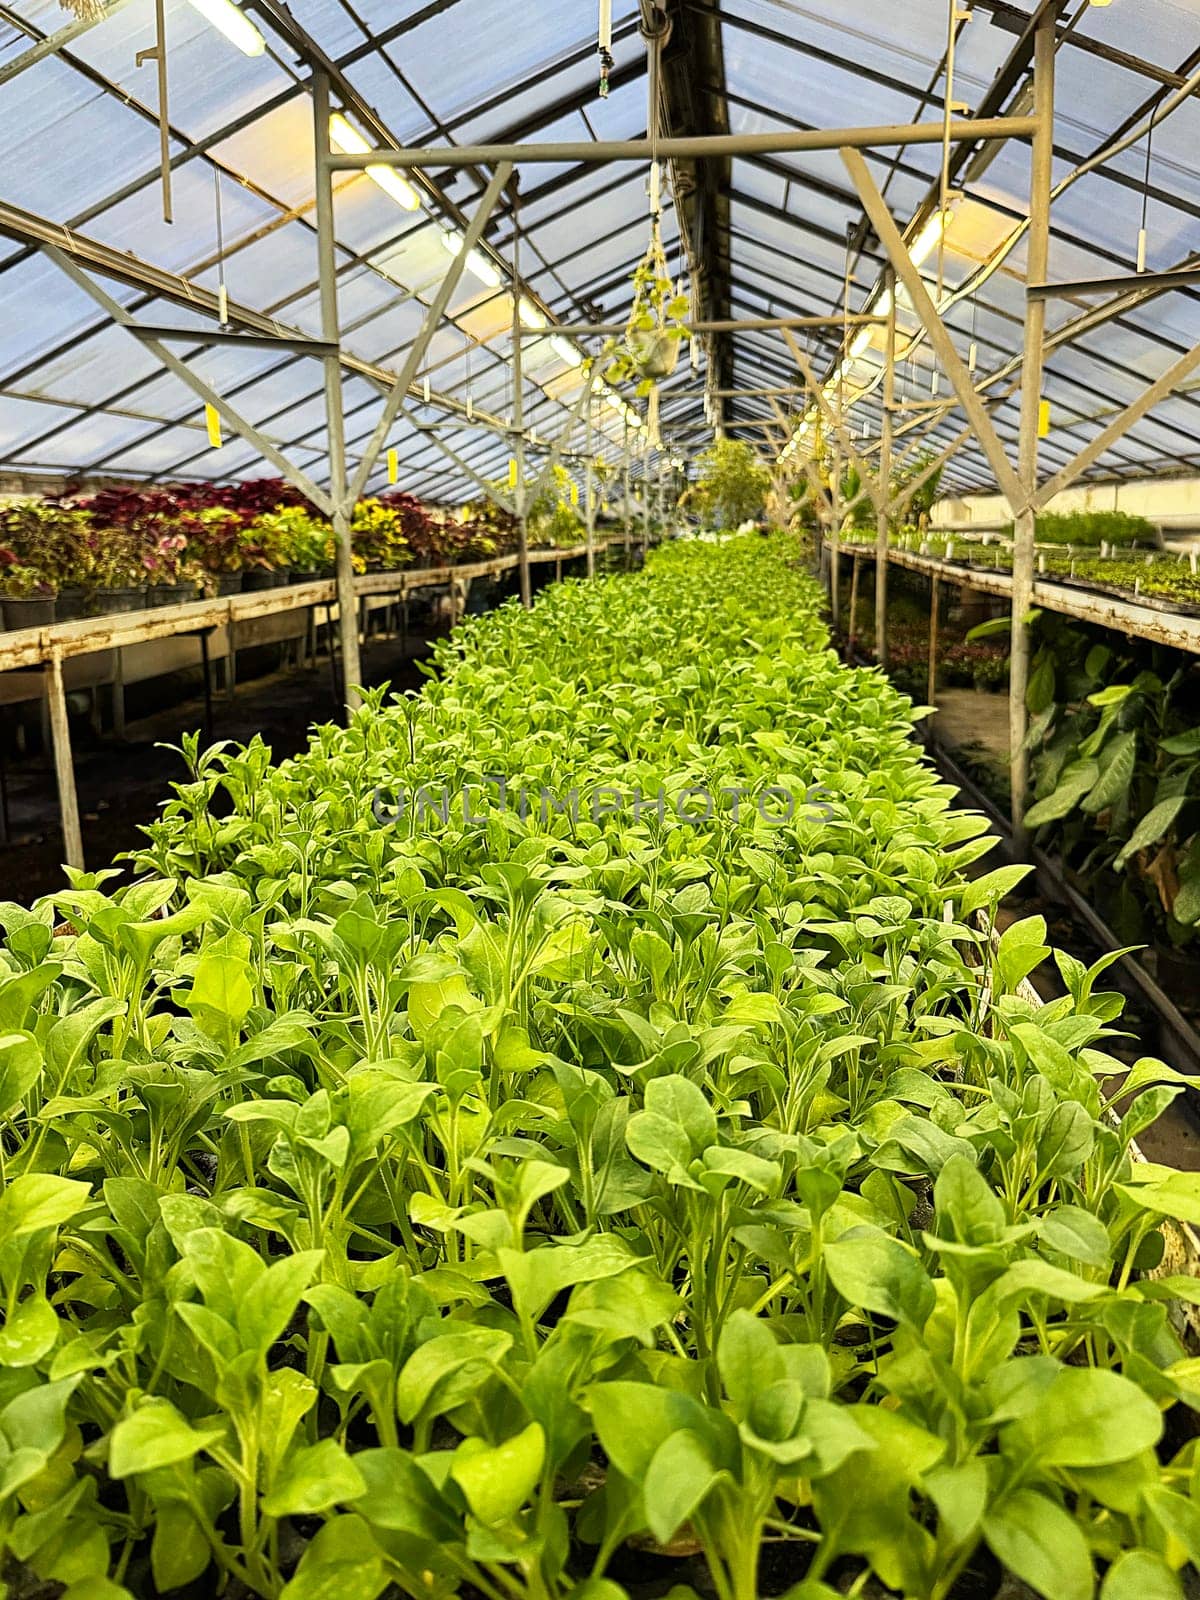 seedlings of ornamental plants in an industrial greenhouse, perspective view.